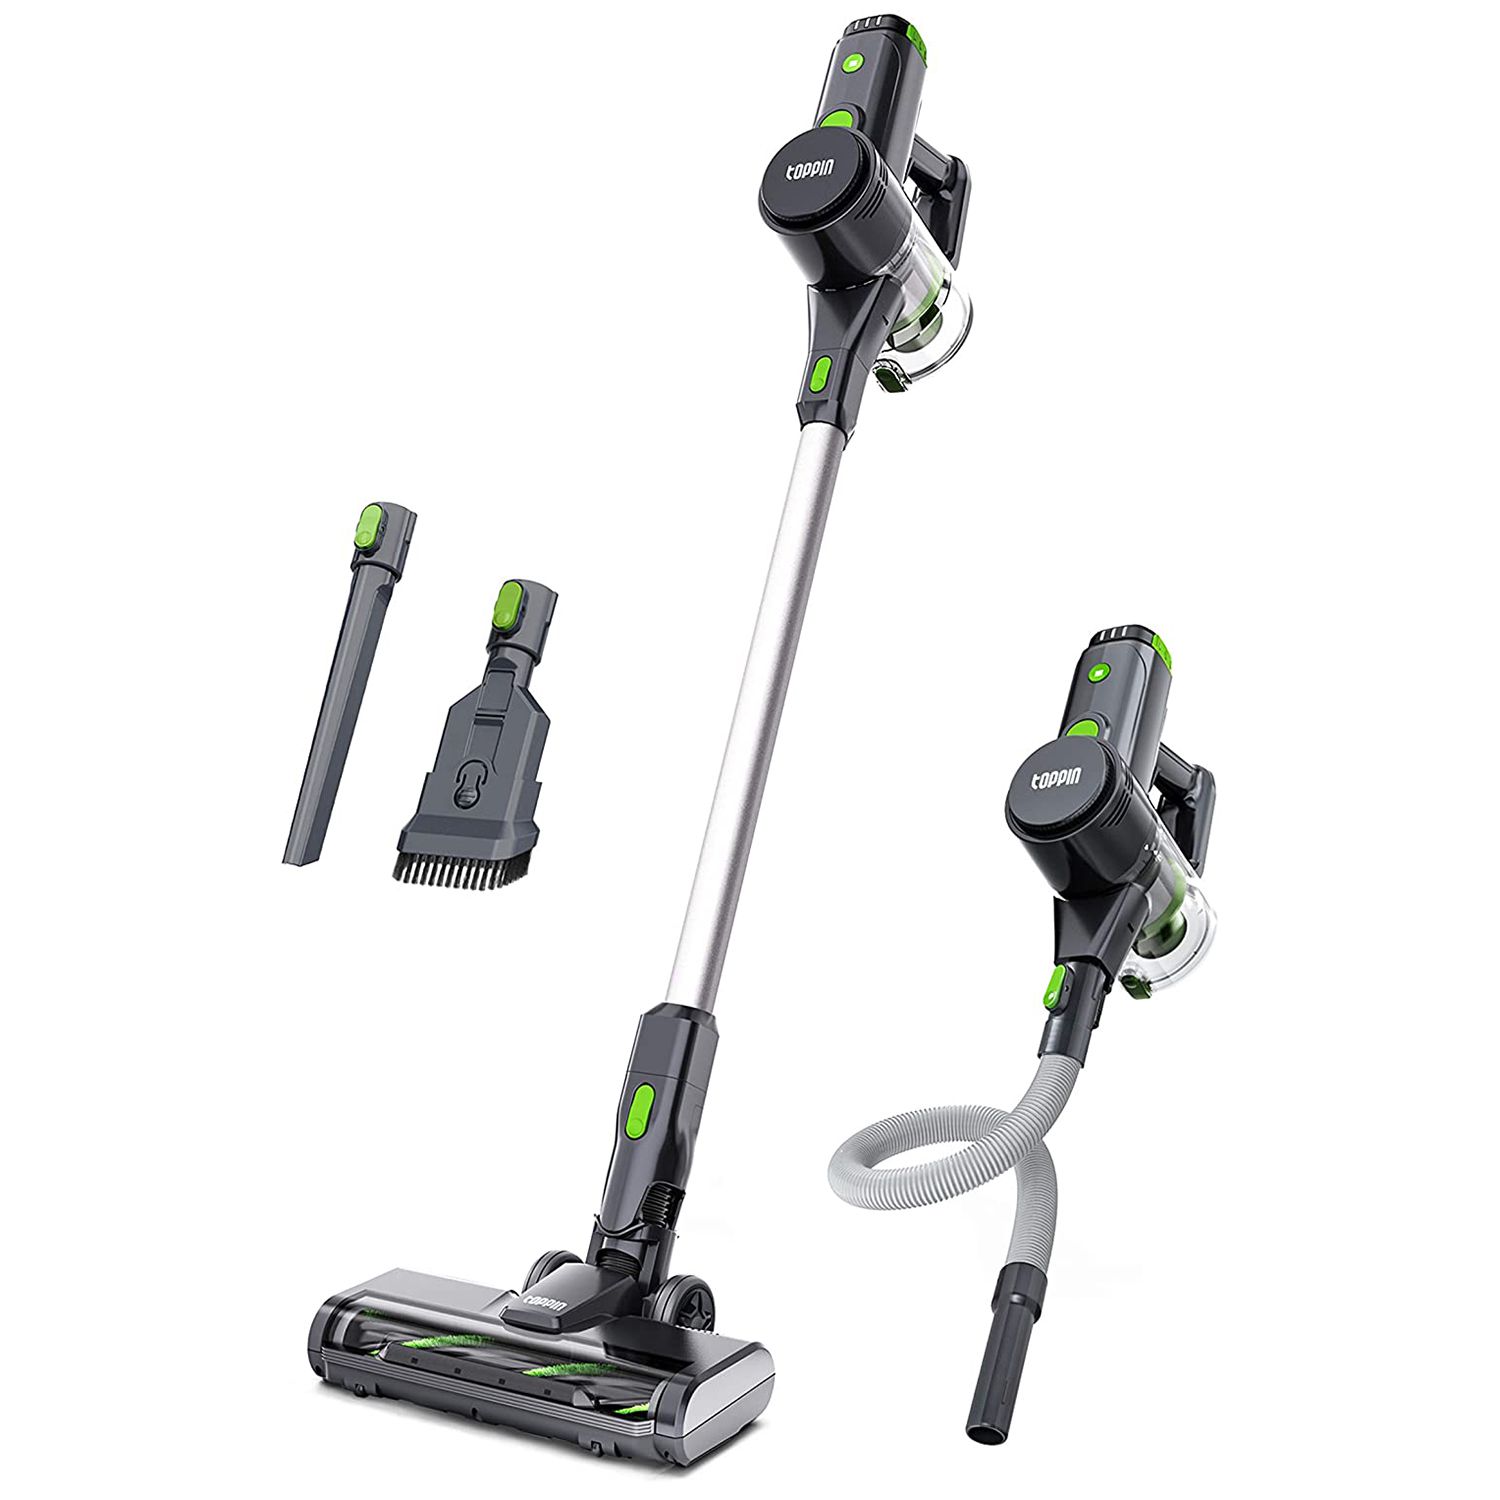 TOPPIN Cordless Stick Vacuum Cleaner